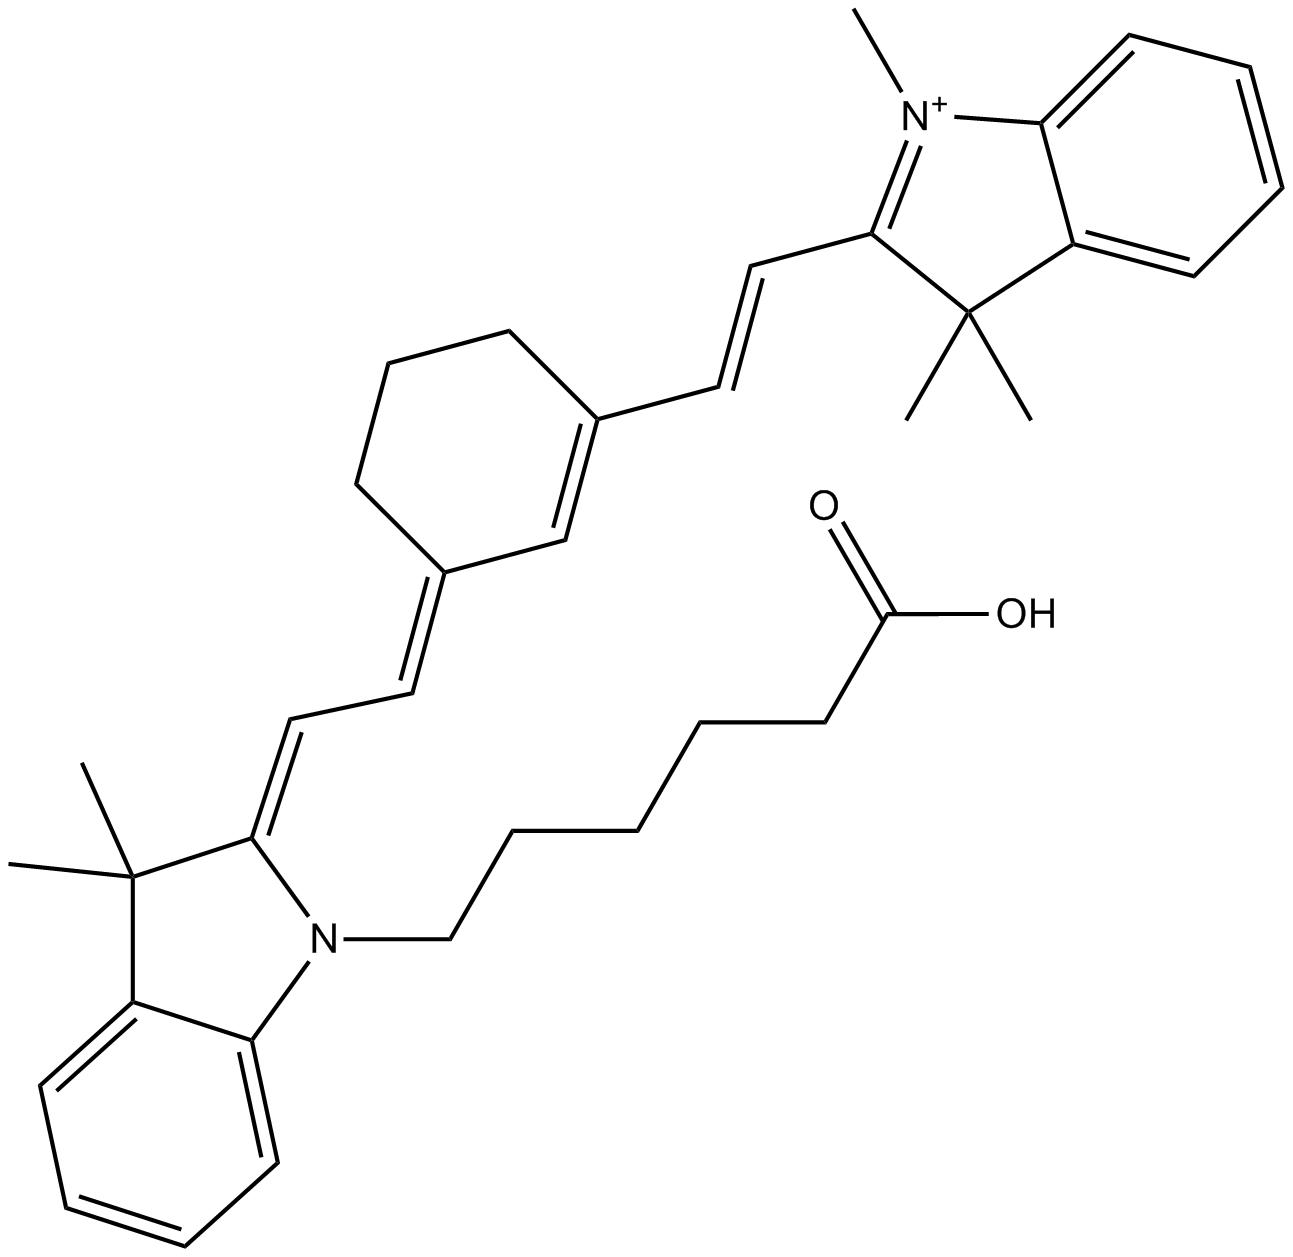 Cy7 carboxylic acid (non-sulfonated)